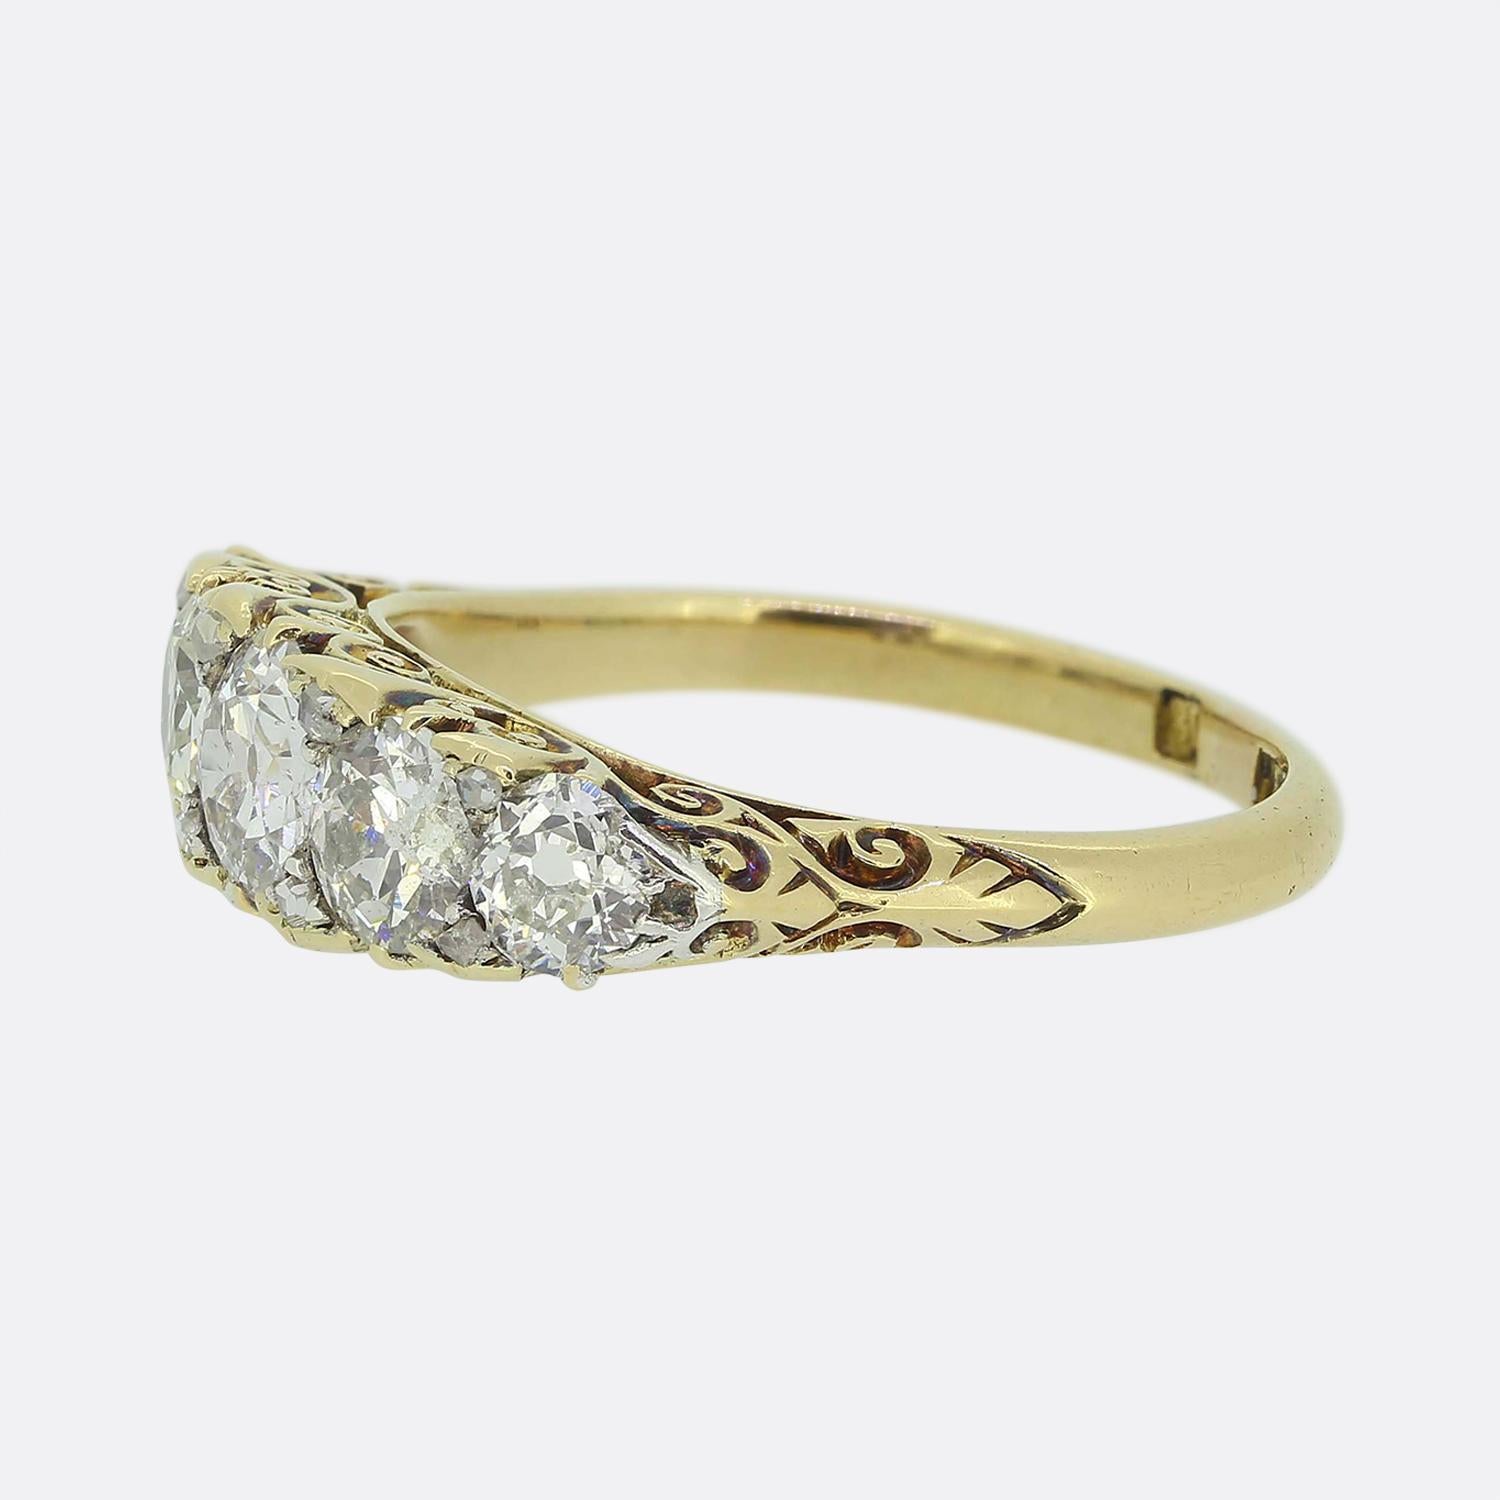 Here we have a lovely five-stone diamond ring taken from the Edwardian era. This antique piece has been crafted from a warm 18ct yellow gold and plays host to five round faceted old European cut diamonds which graduate in size towards the centre and